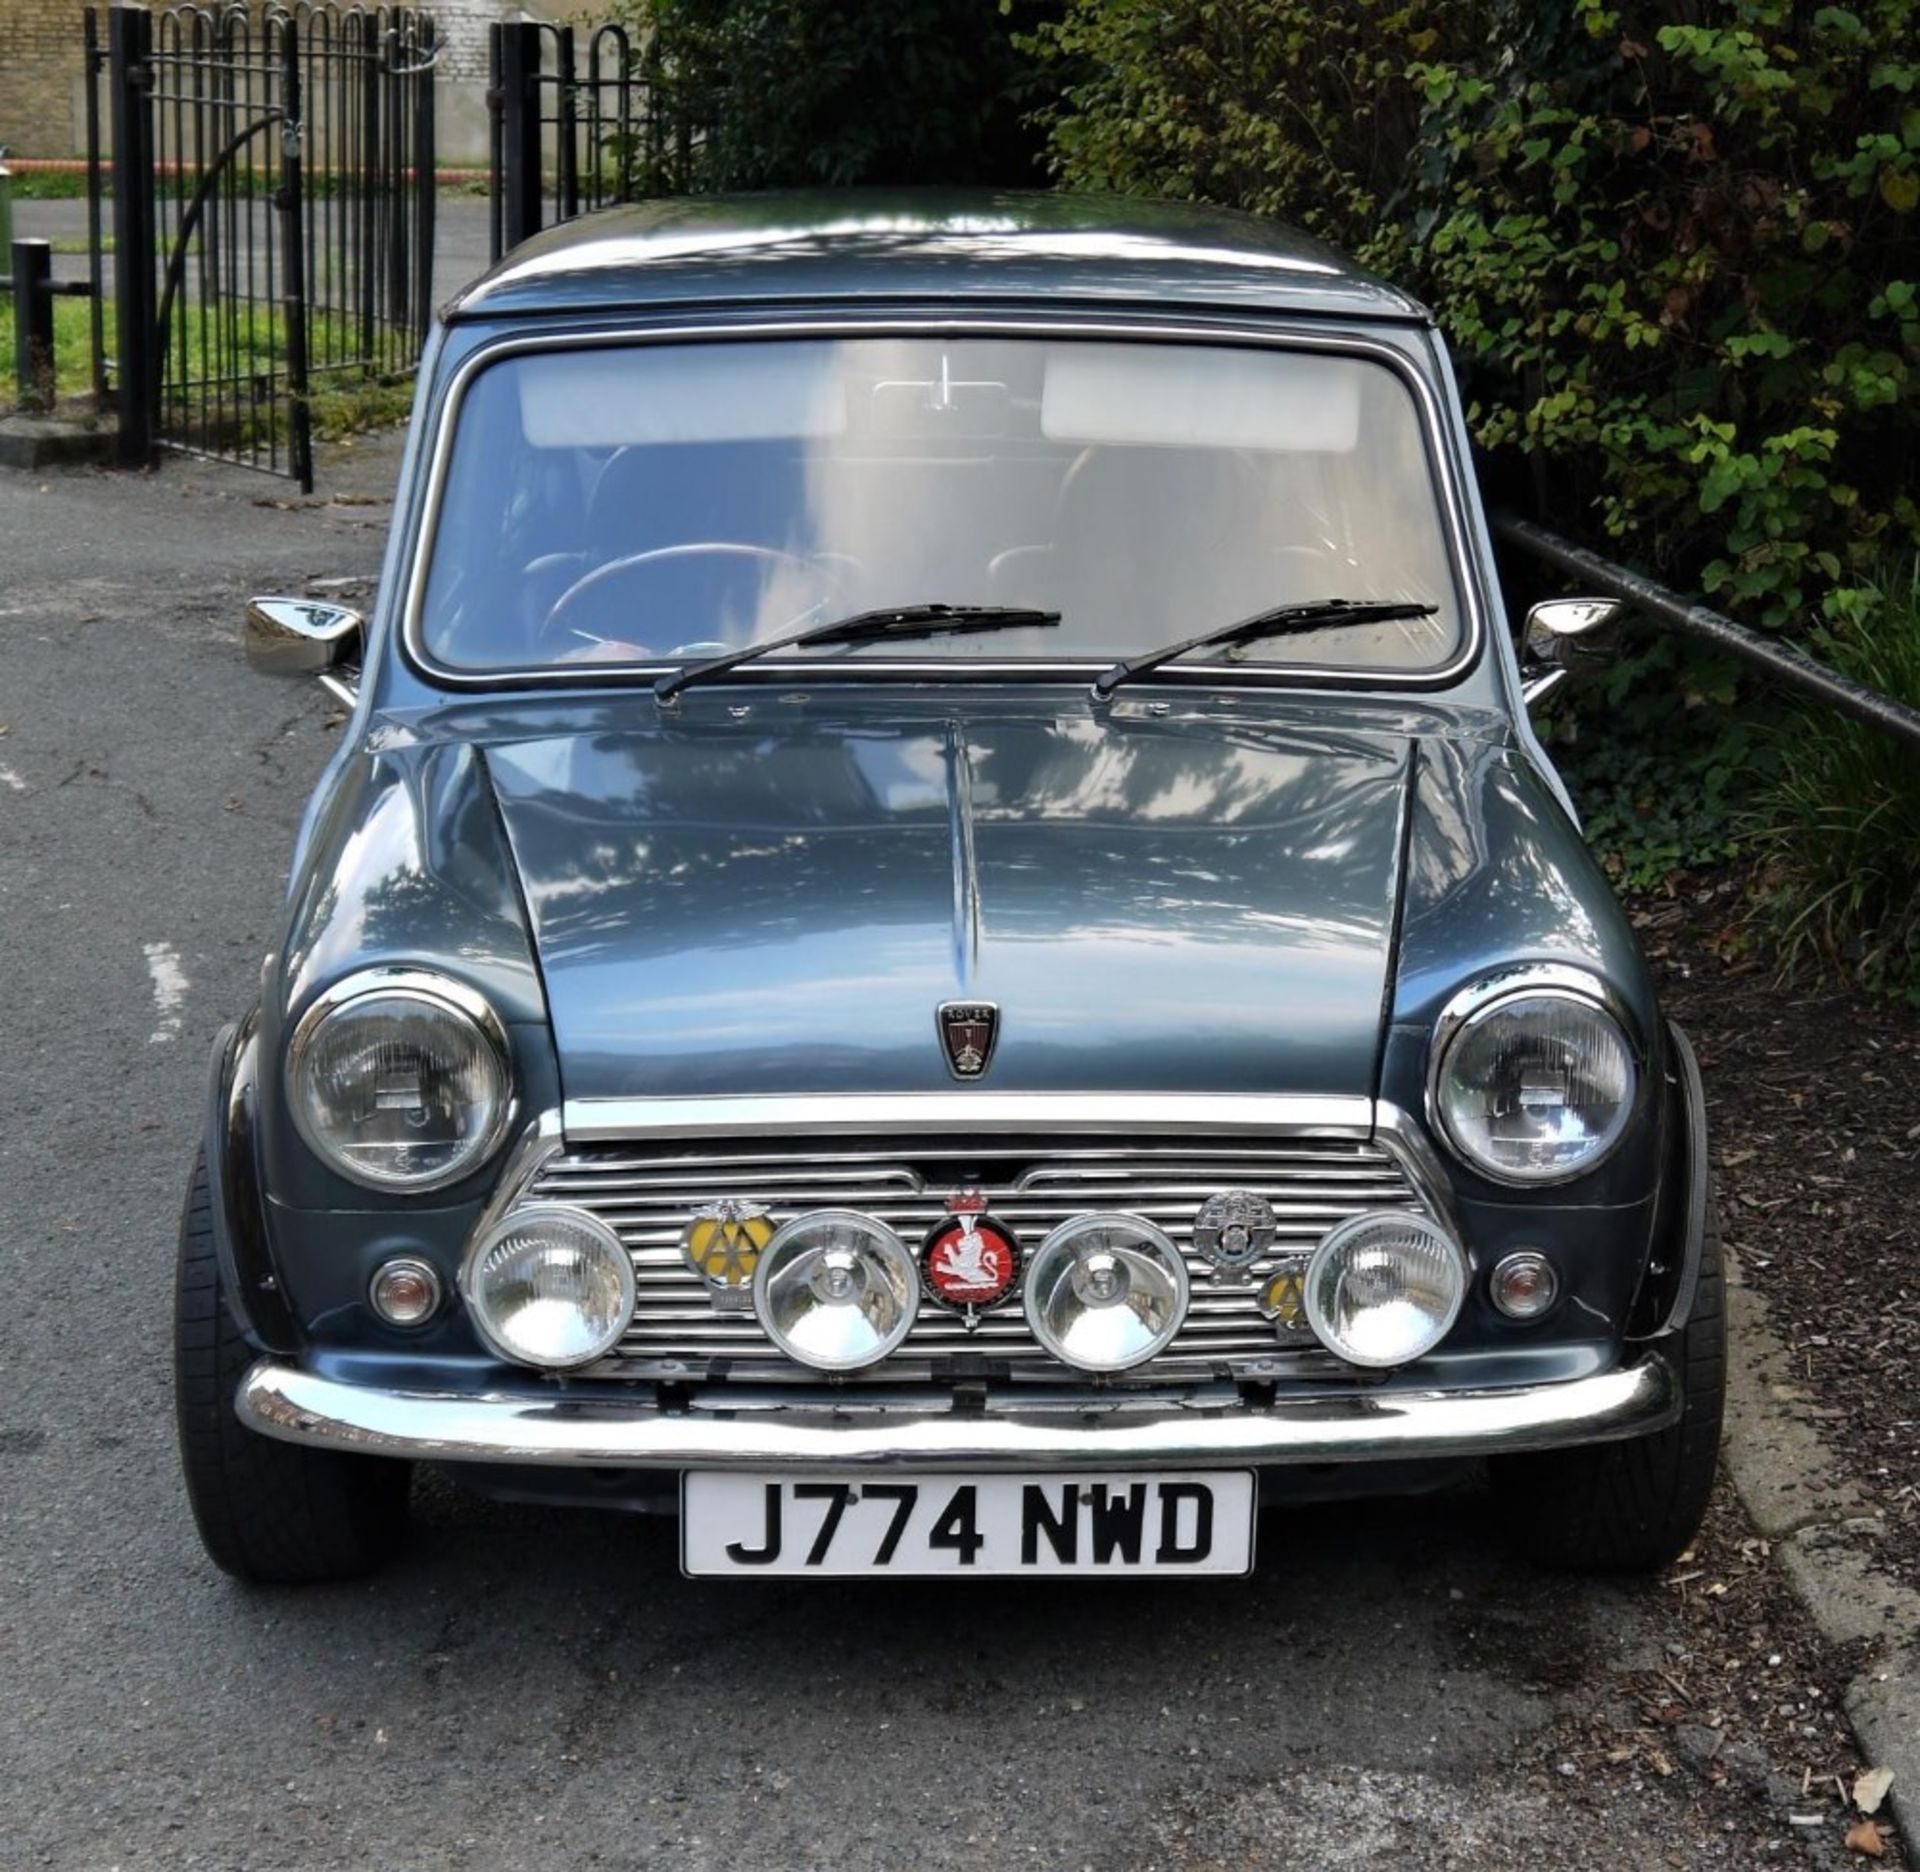 1991 ROVER MINI NEON Registration Number: J774 NWD Recorded Mileage: 58,000 miles Chassis Number: - Bild 16 aus 24